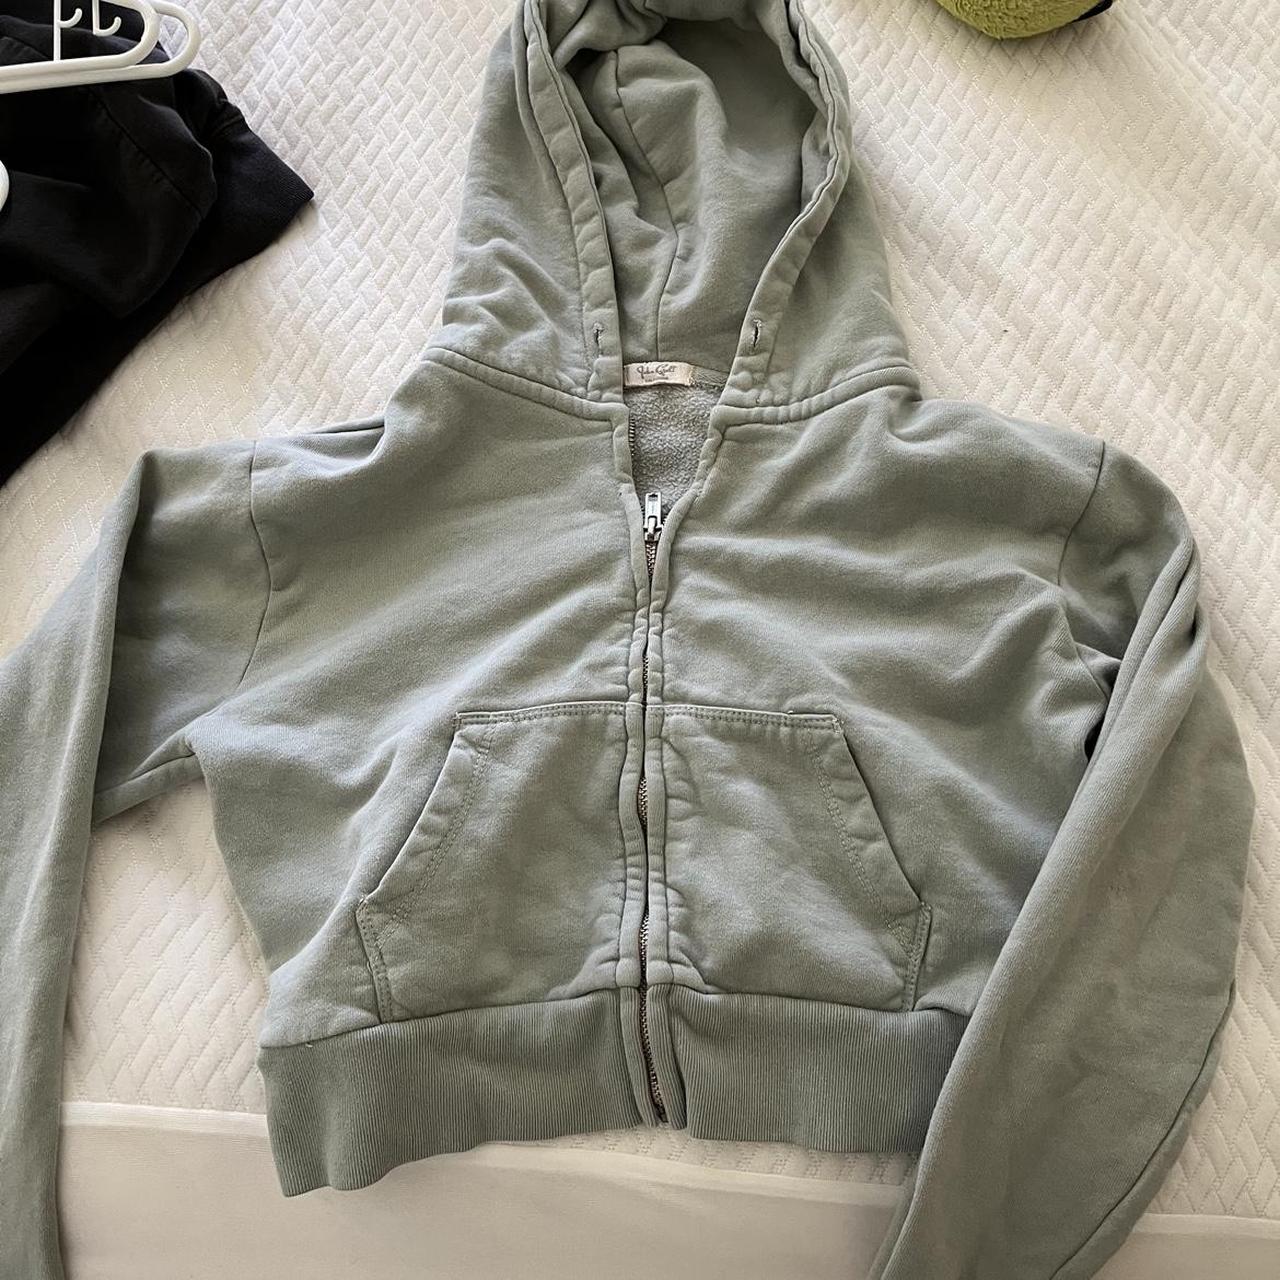 Cropped White Brandy Melville Zip Up Hoodie,, 44% OFF